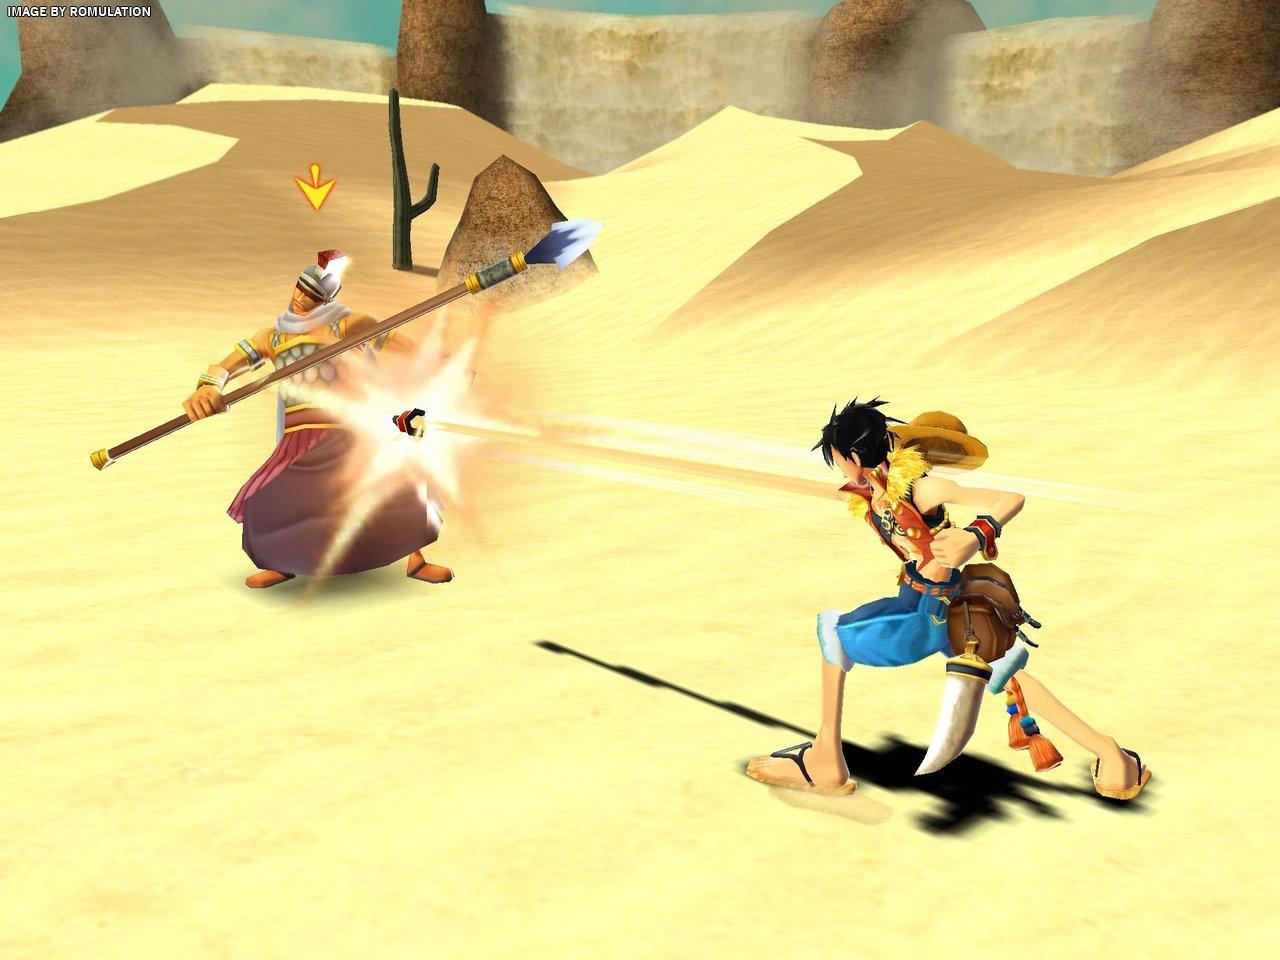 one piece unlimited cruise wii iso